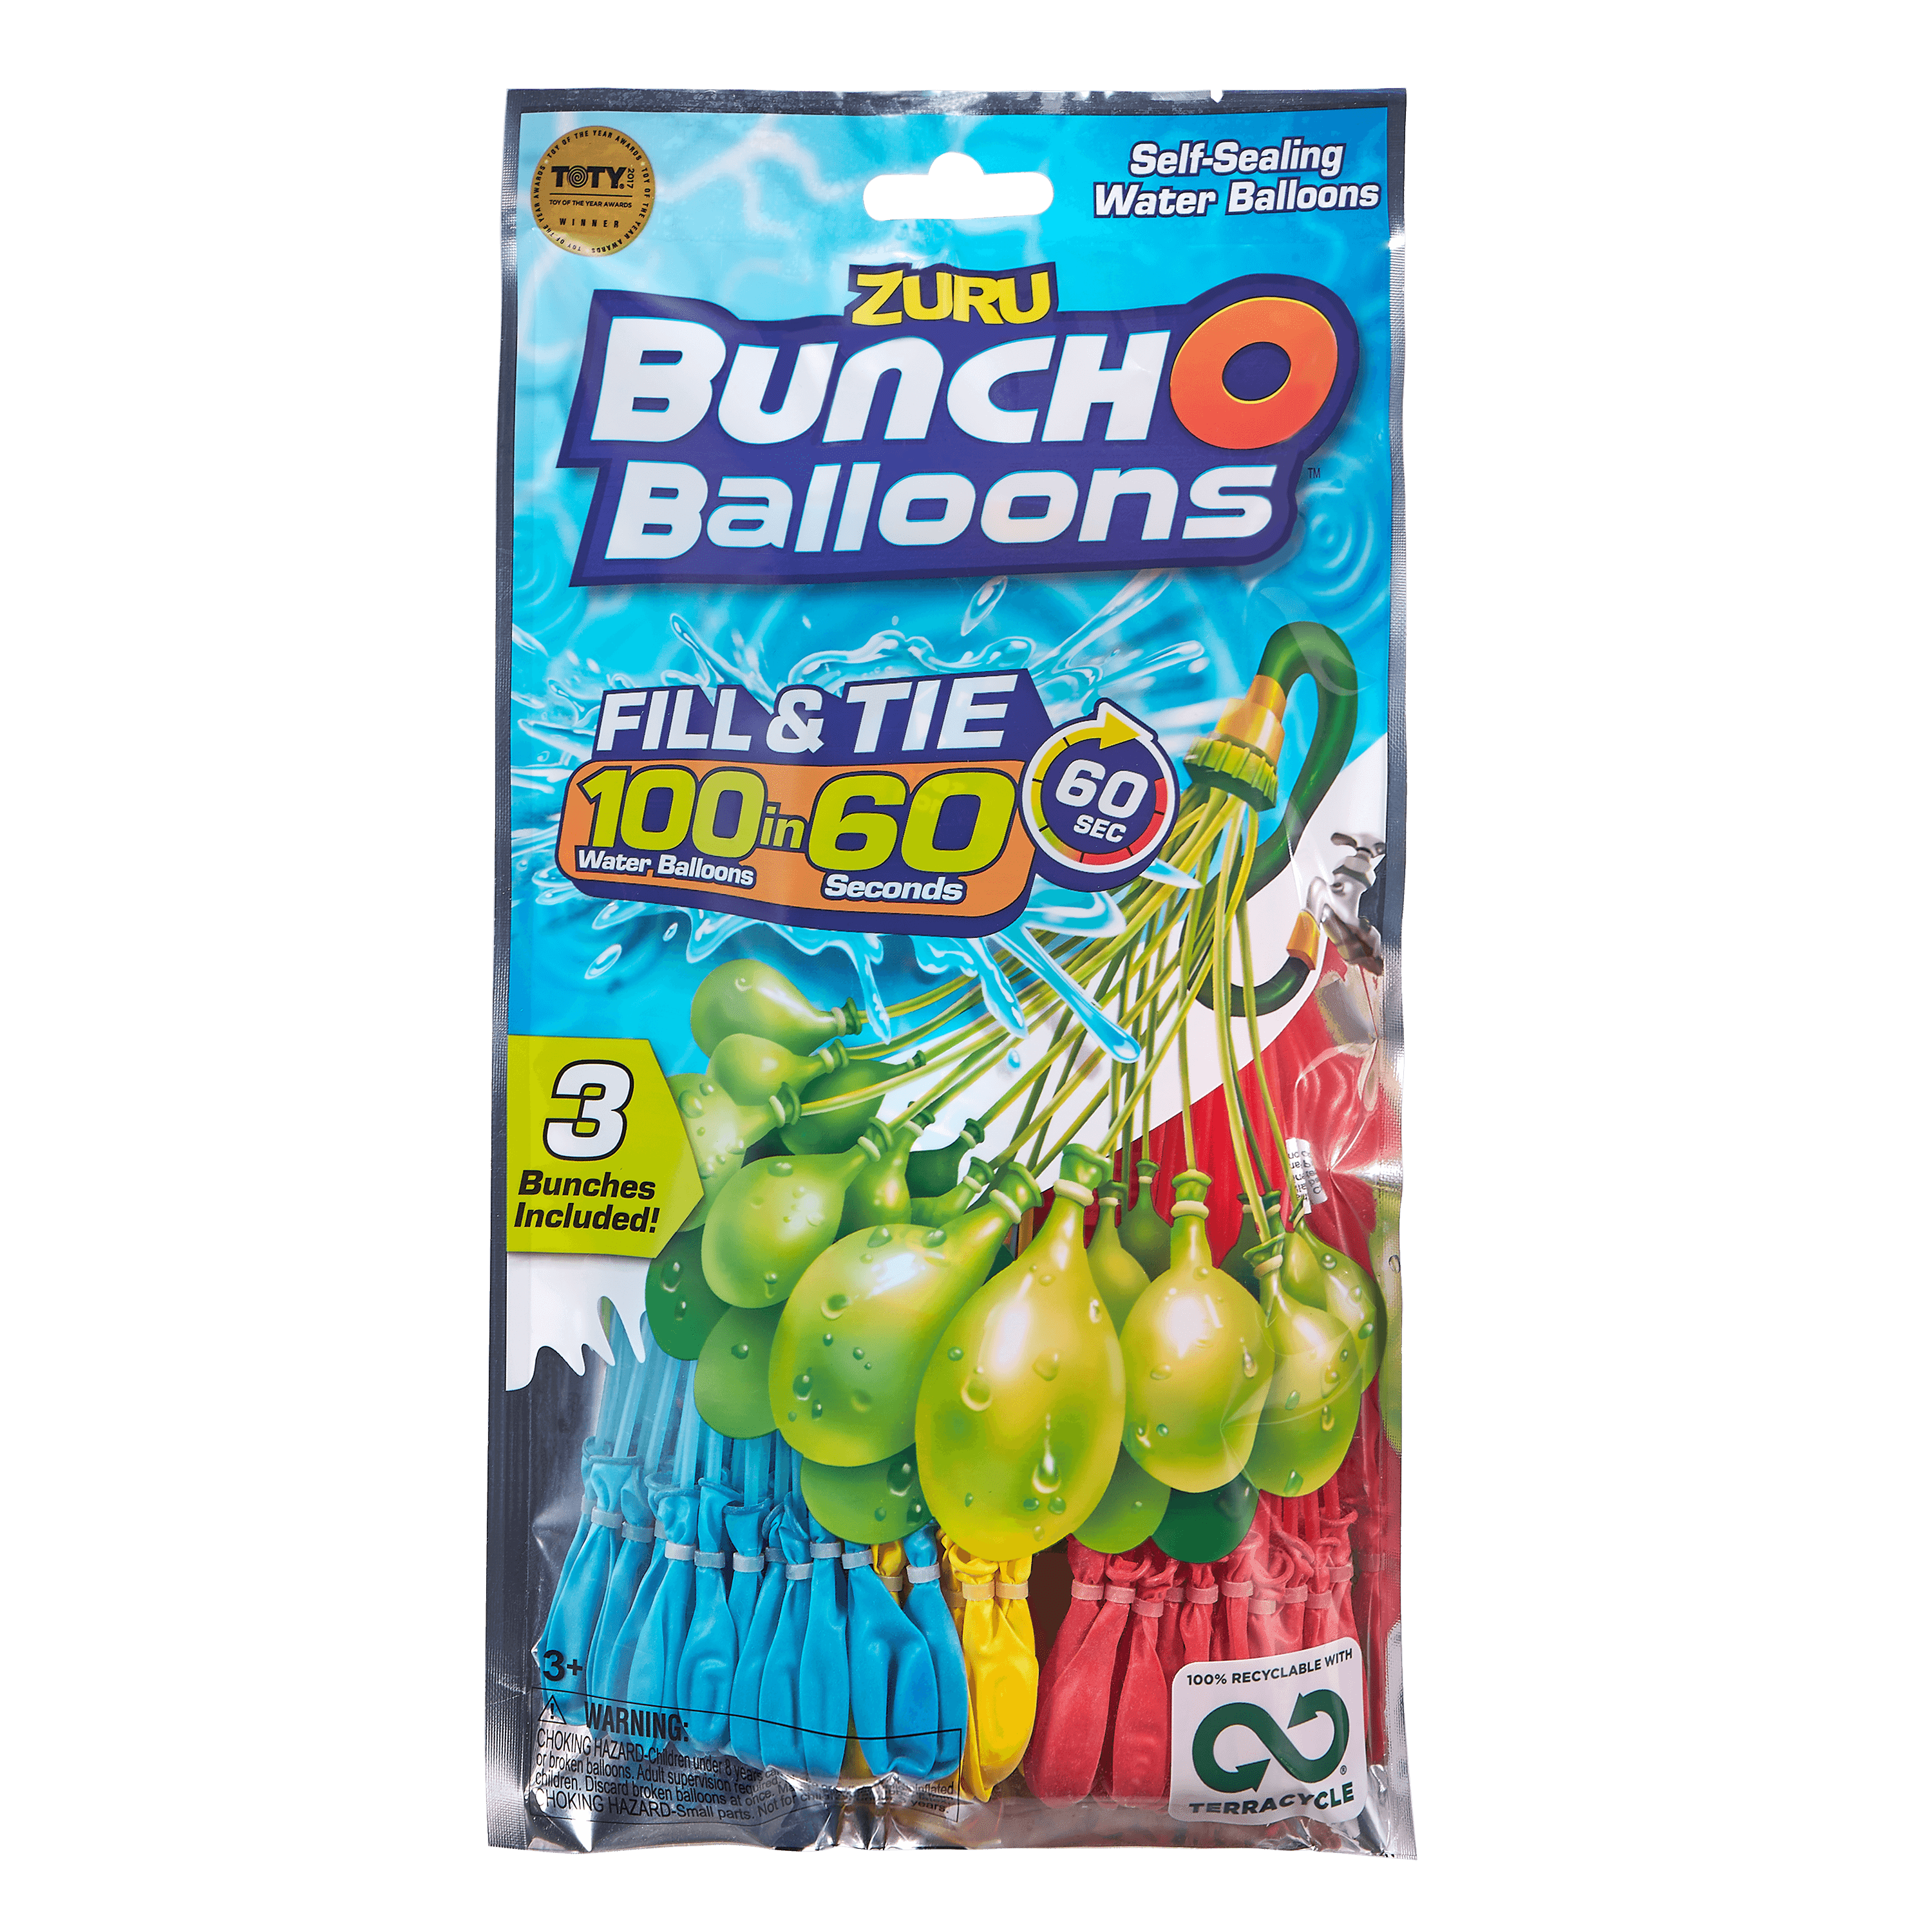 New 1 Pack ZURU 100 Bunch O Balloons 3 Different Colors Fill in 60 Seconds 